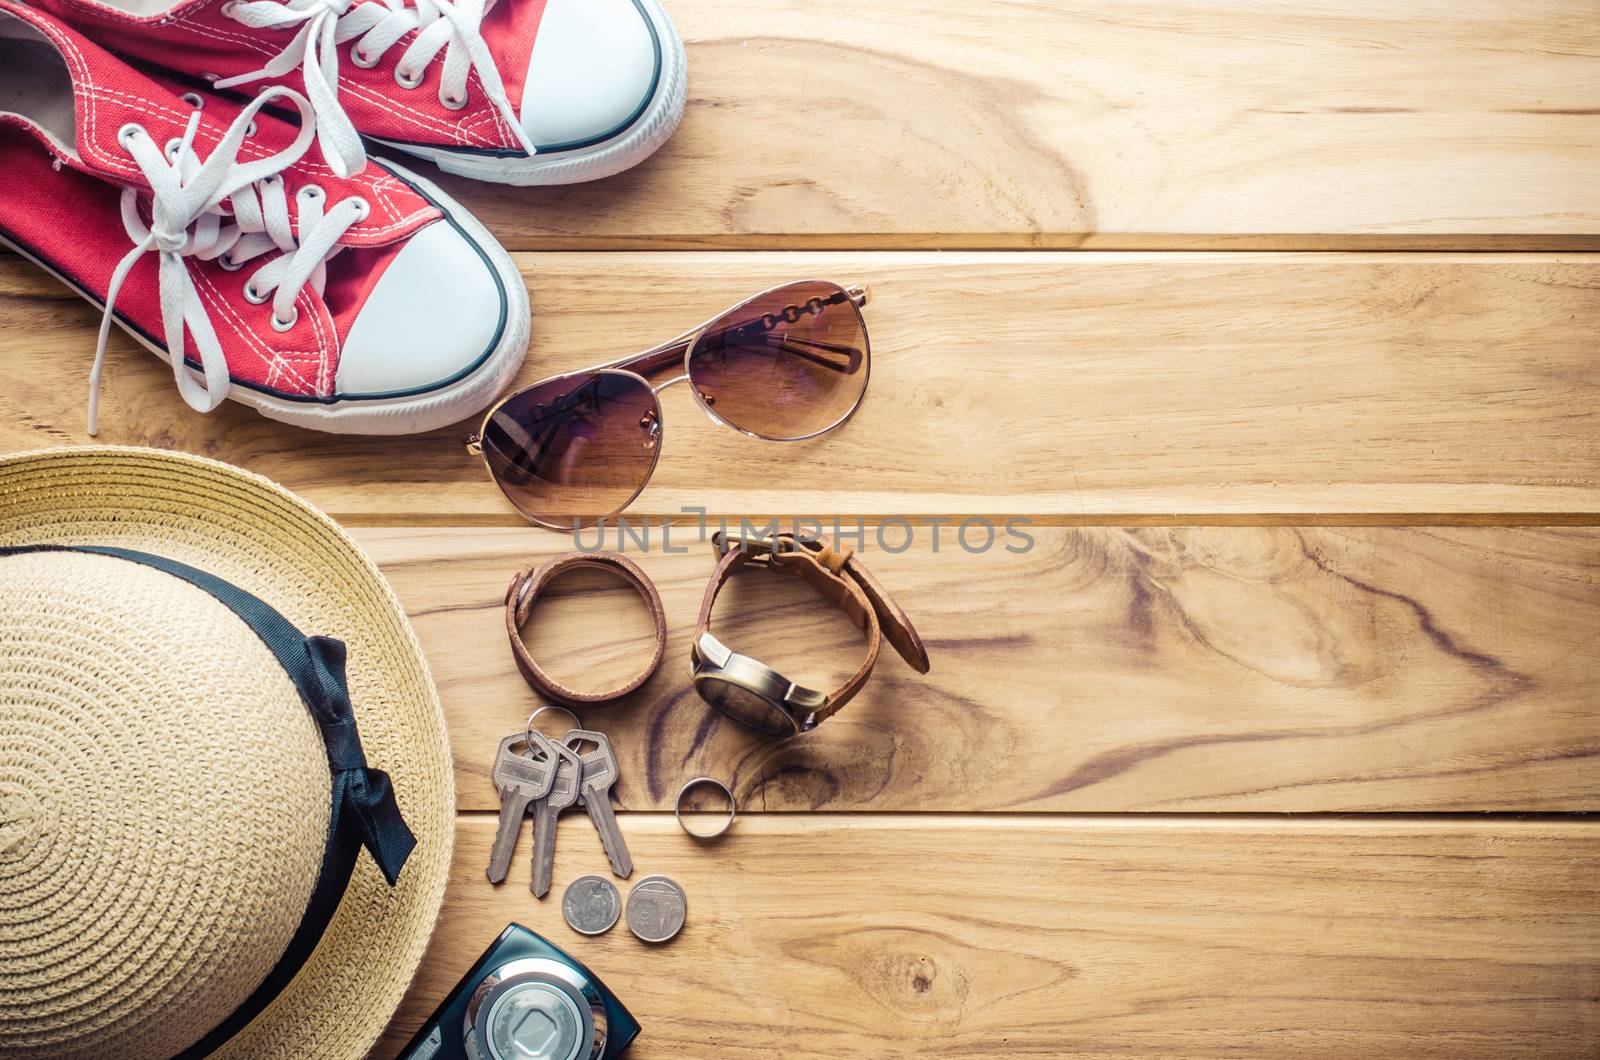 Clothing and accessories for travel on wood floor